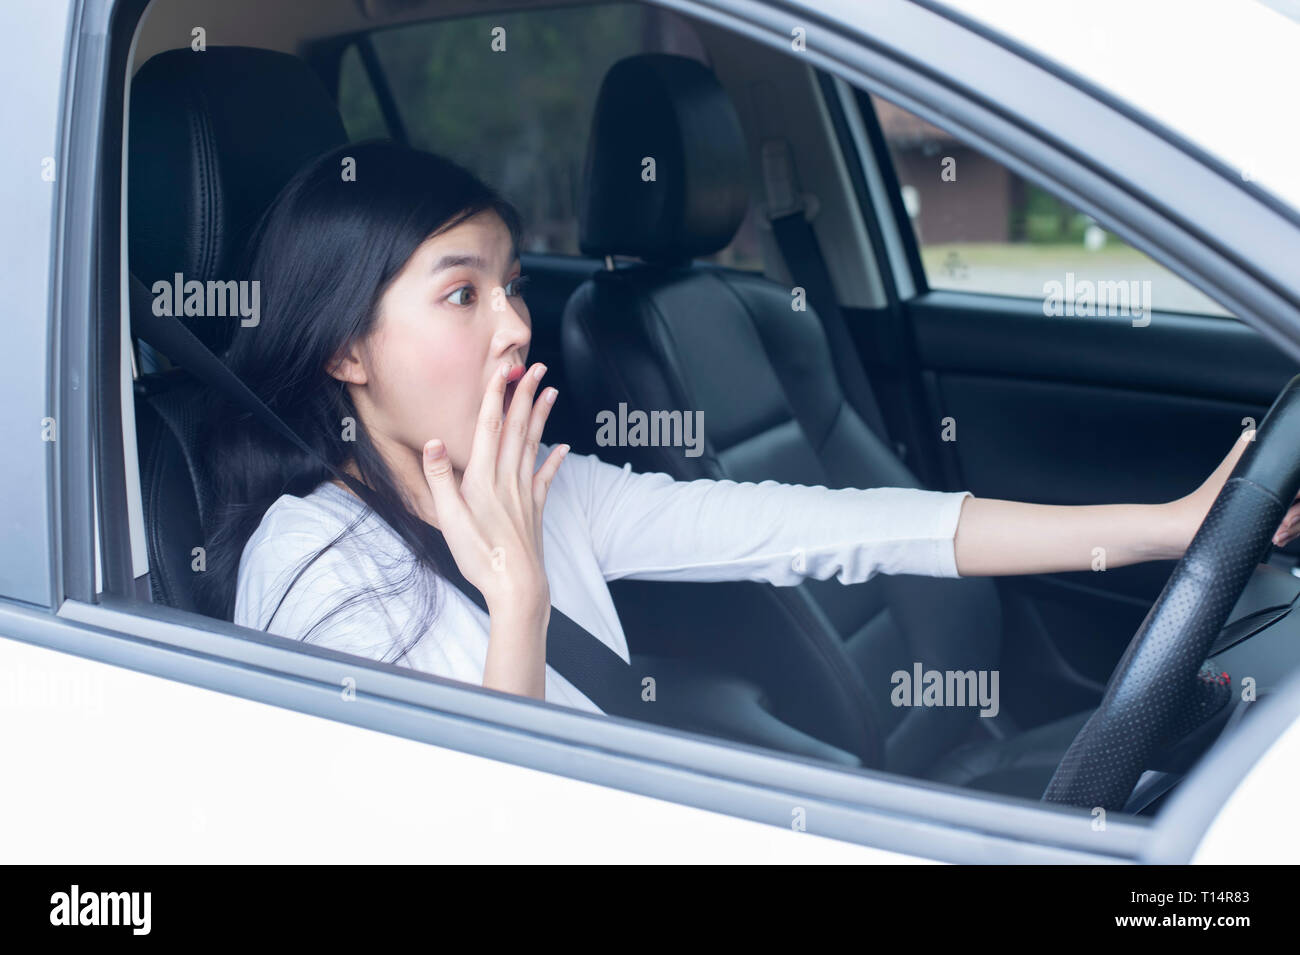 Young woman panic in a car - Image Stock Photo